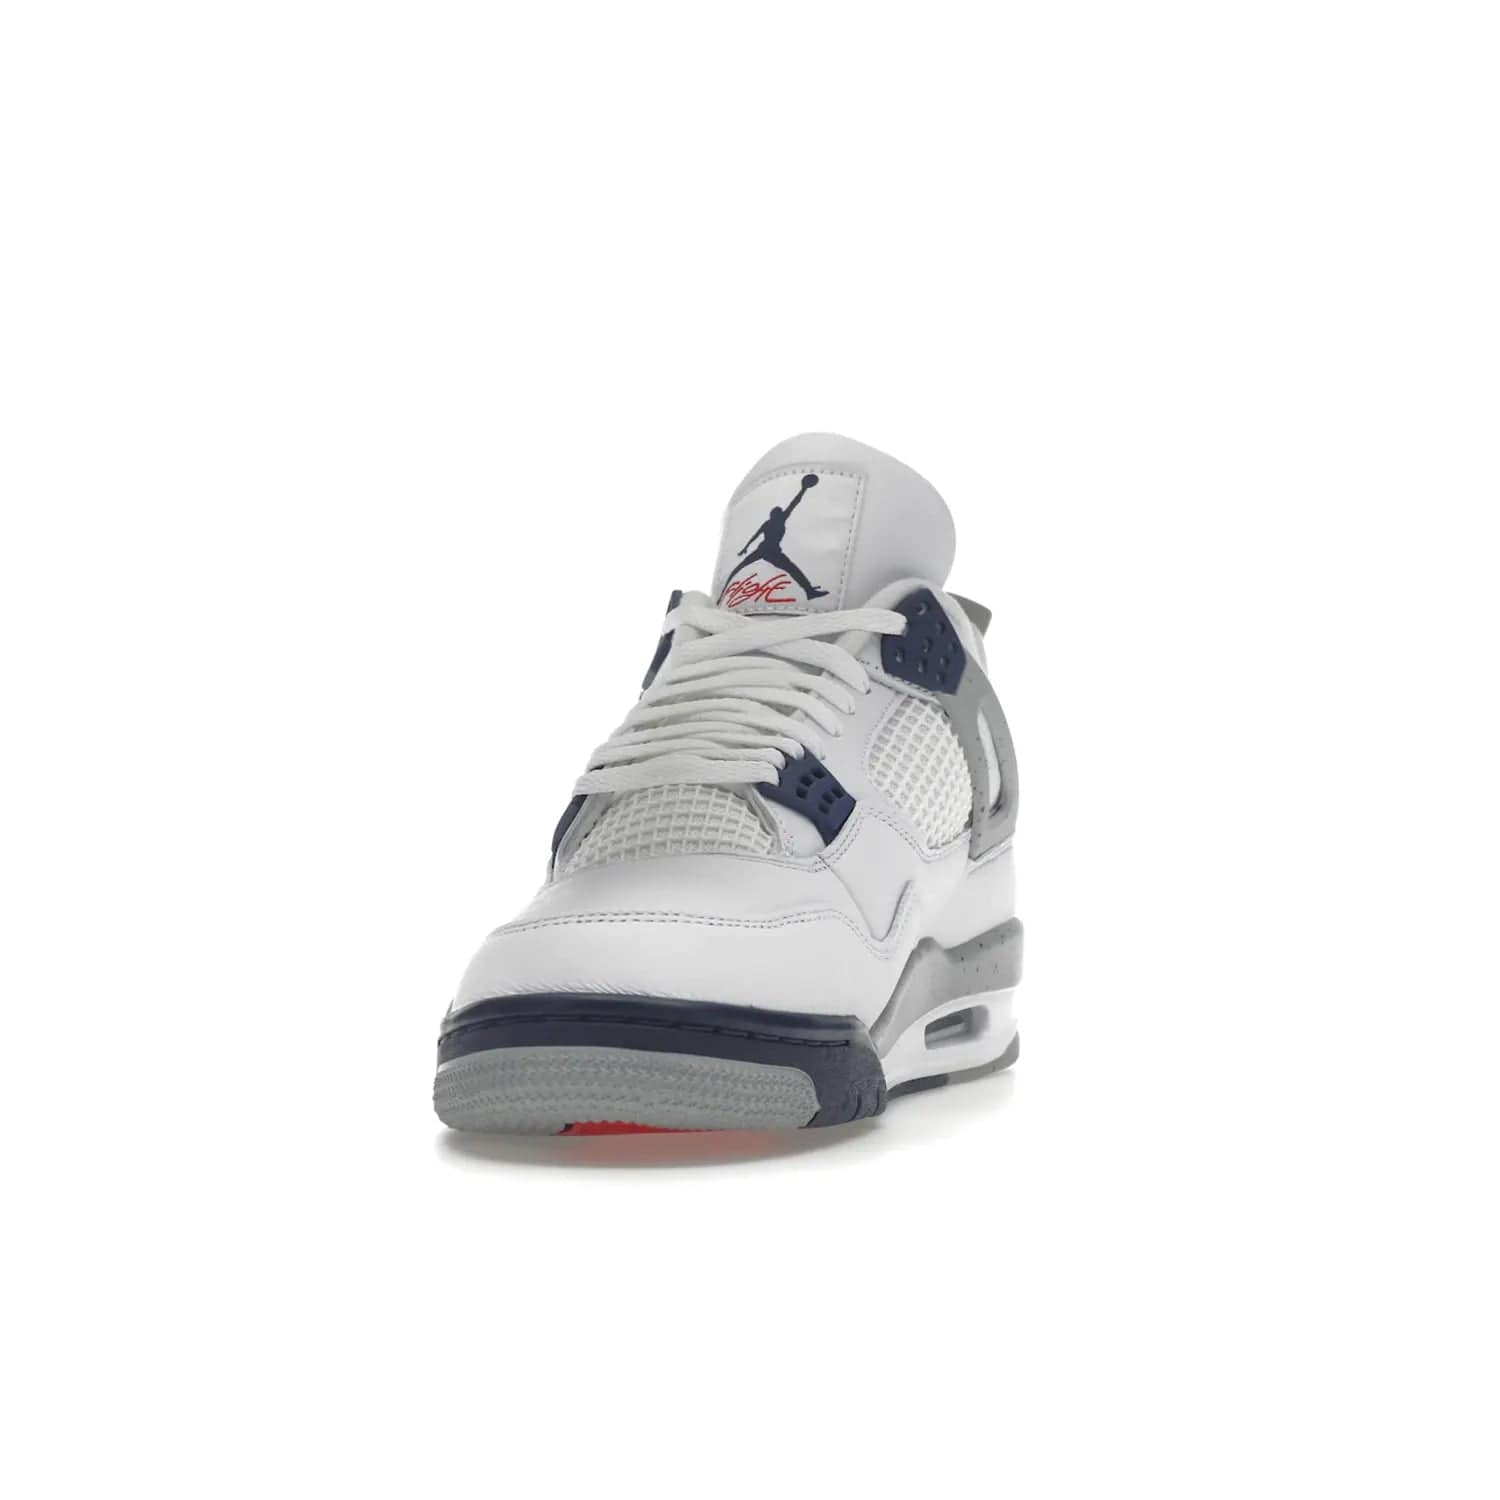 Jordan 4 Retro Midnight Navy - Image 12 - Only at www.BallersClubKickz.com - Shop the Air Jordan Retro 4 White Midnight Navy. Stand out with a classic white leather upper, black support wings, midnight navy eyelets, and Crimson Jumpman tongue tag. Unbeatable comfort with two-tone polyurethane midsole with encapsulated Air technology. Get yours before October 29th, 2022.